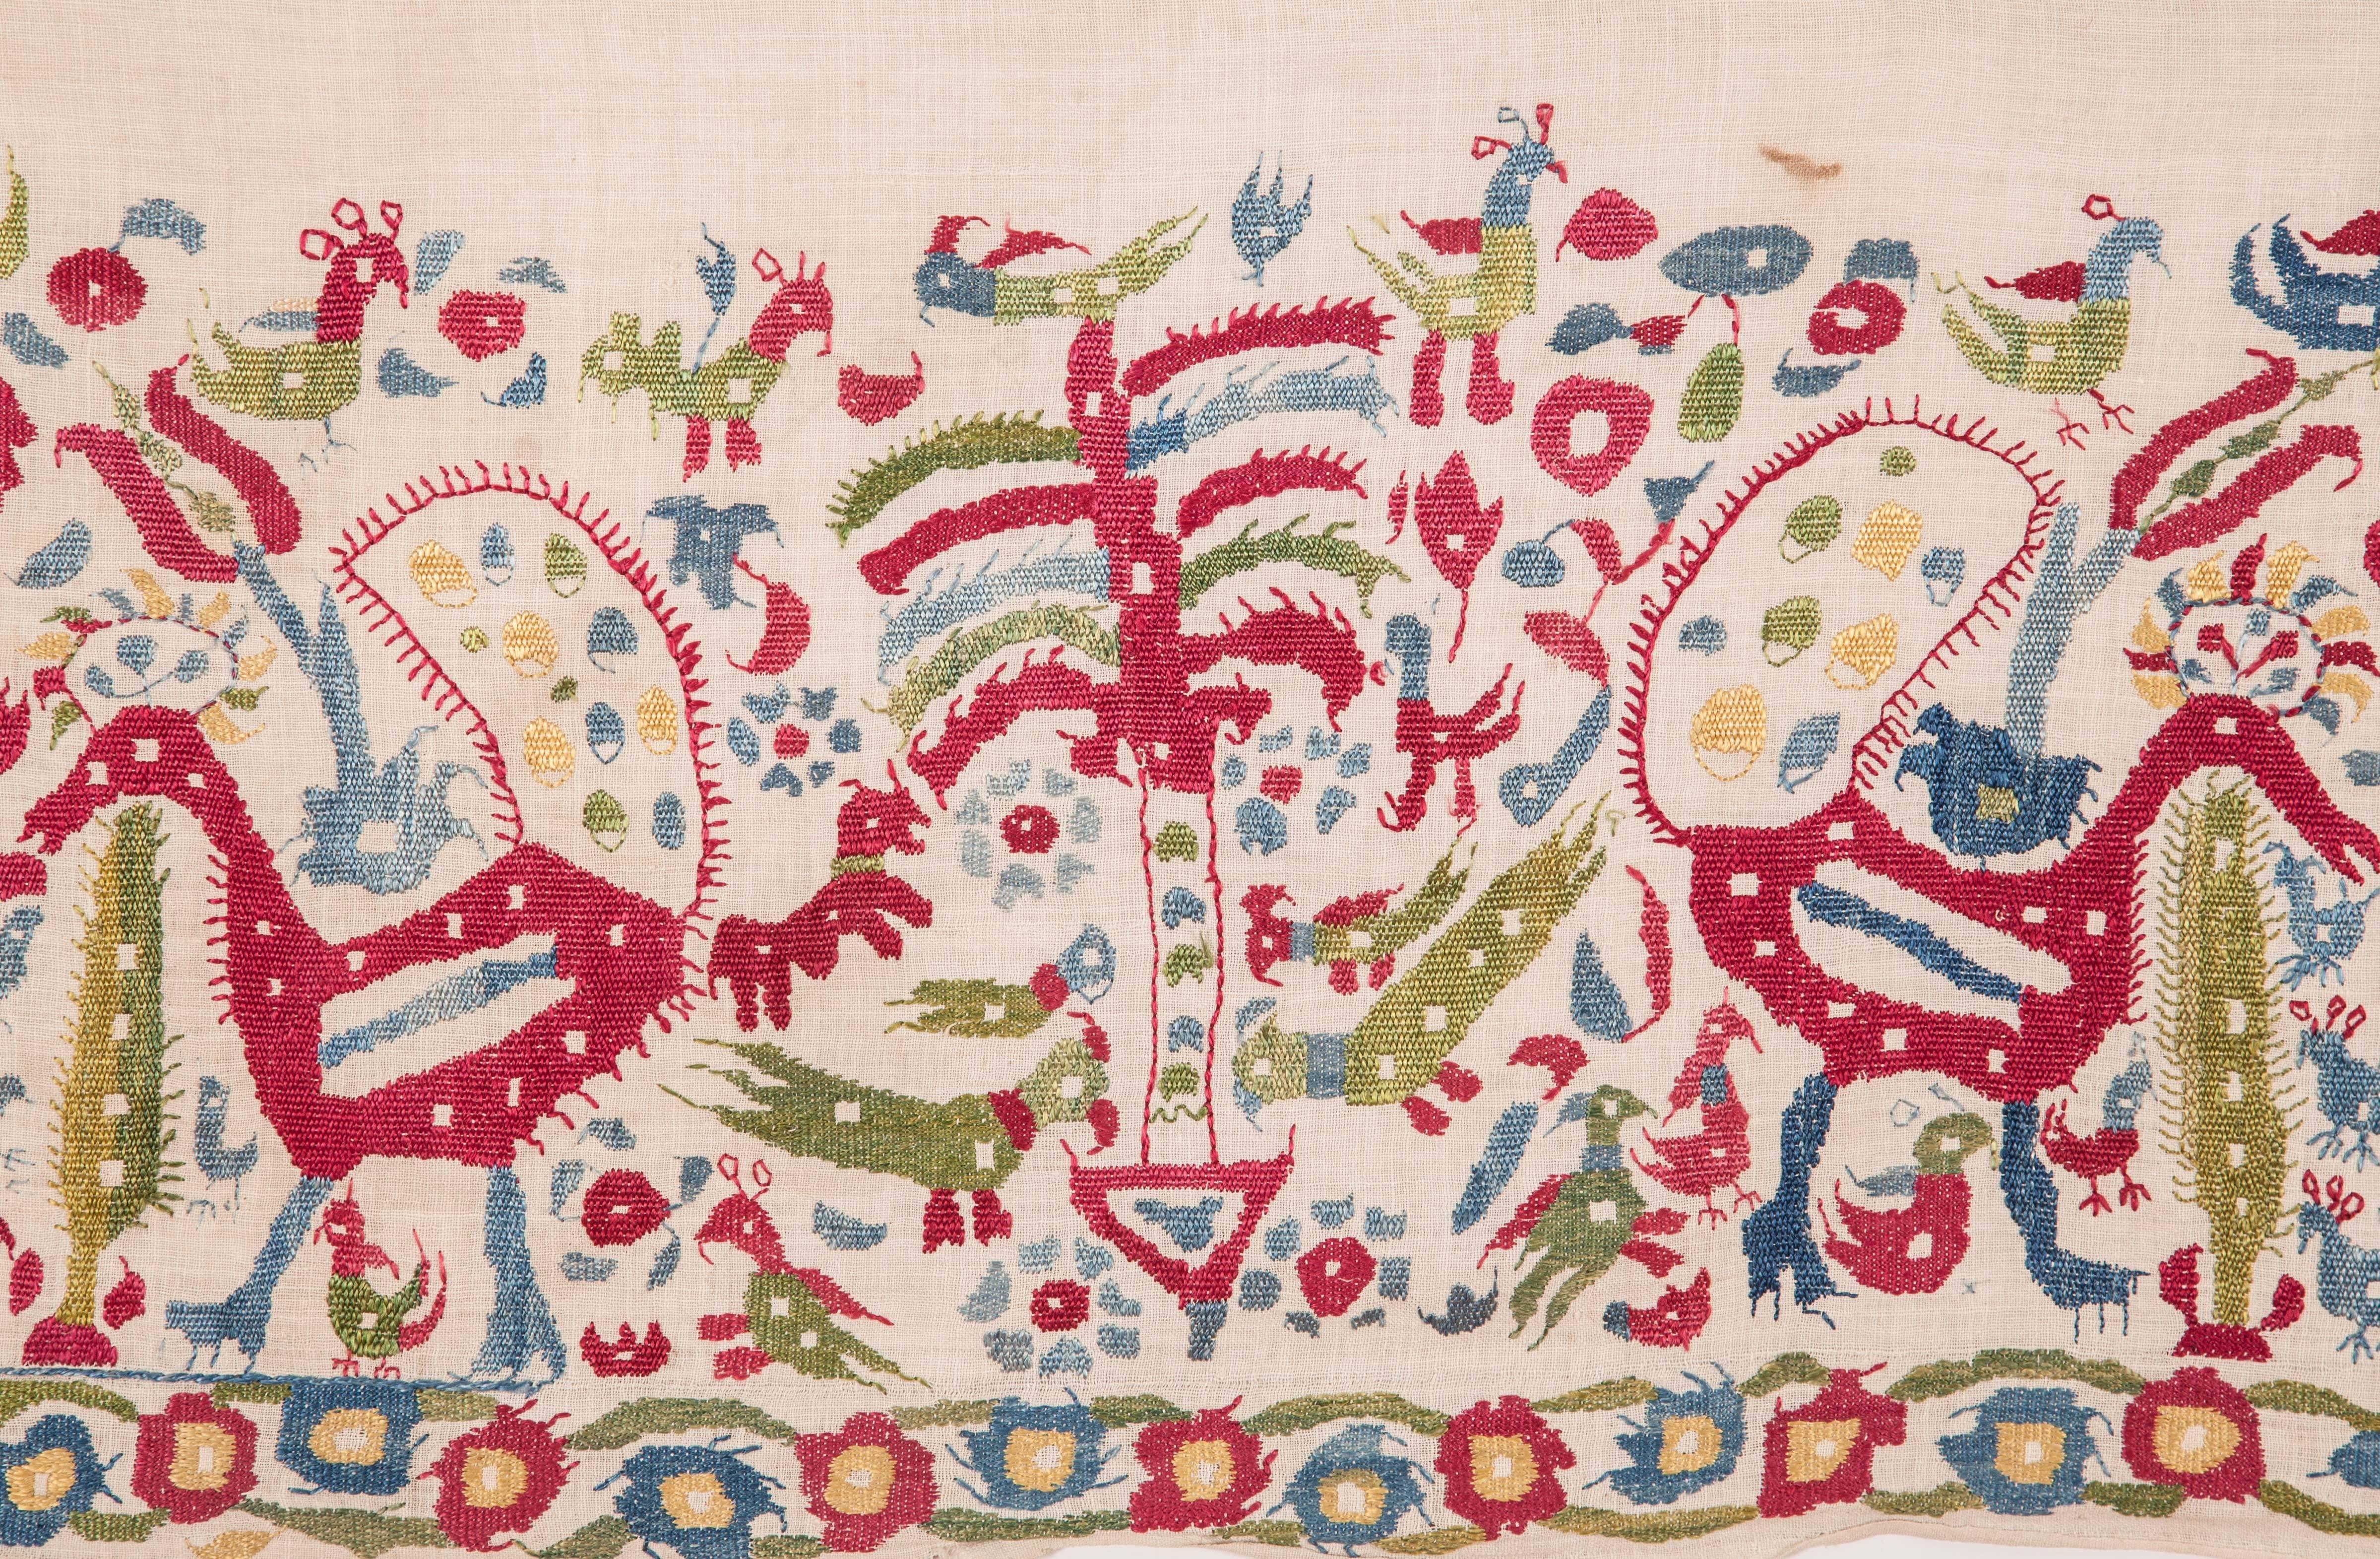 Suzani 18th Century Embroidered Fragment from Epirus, Greece